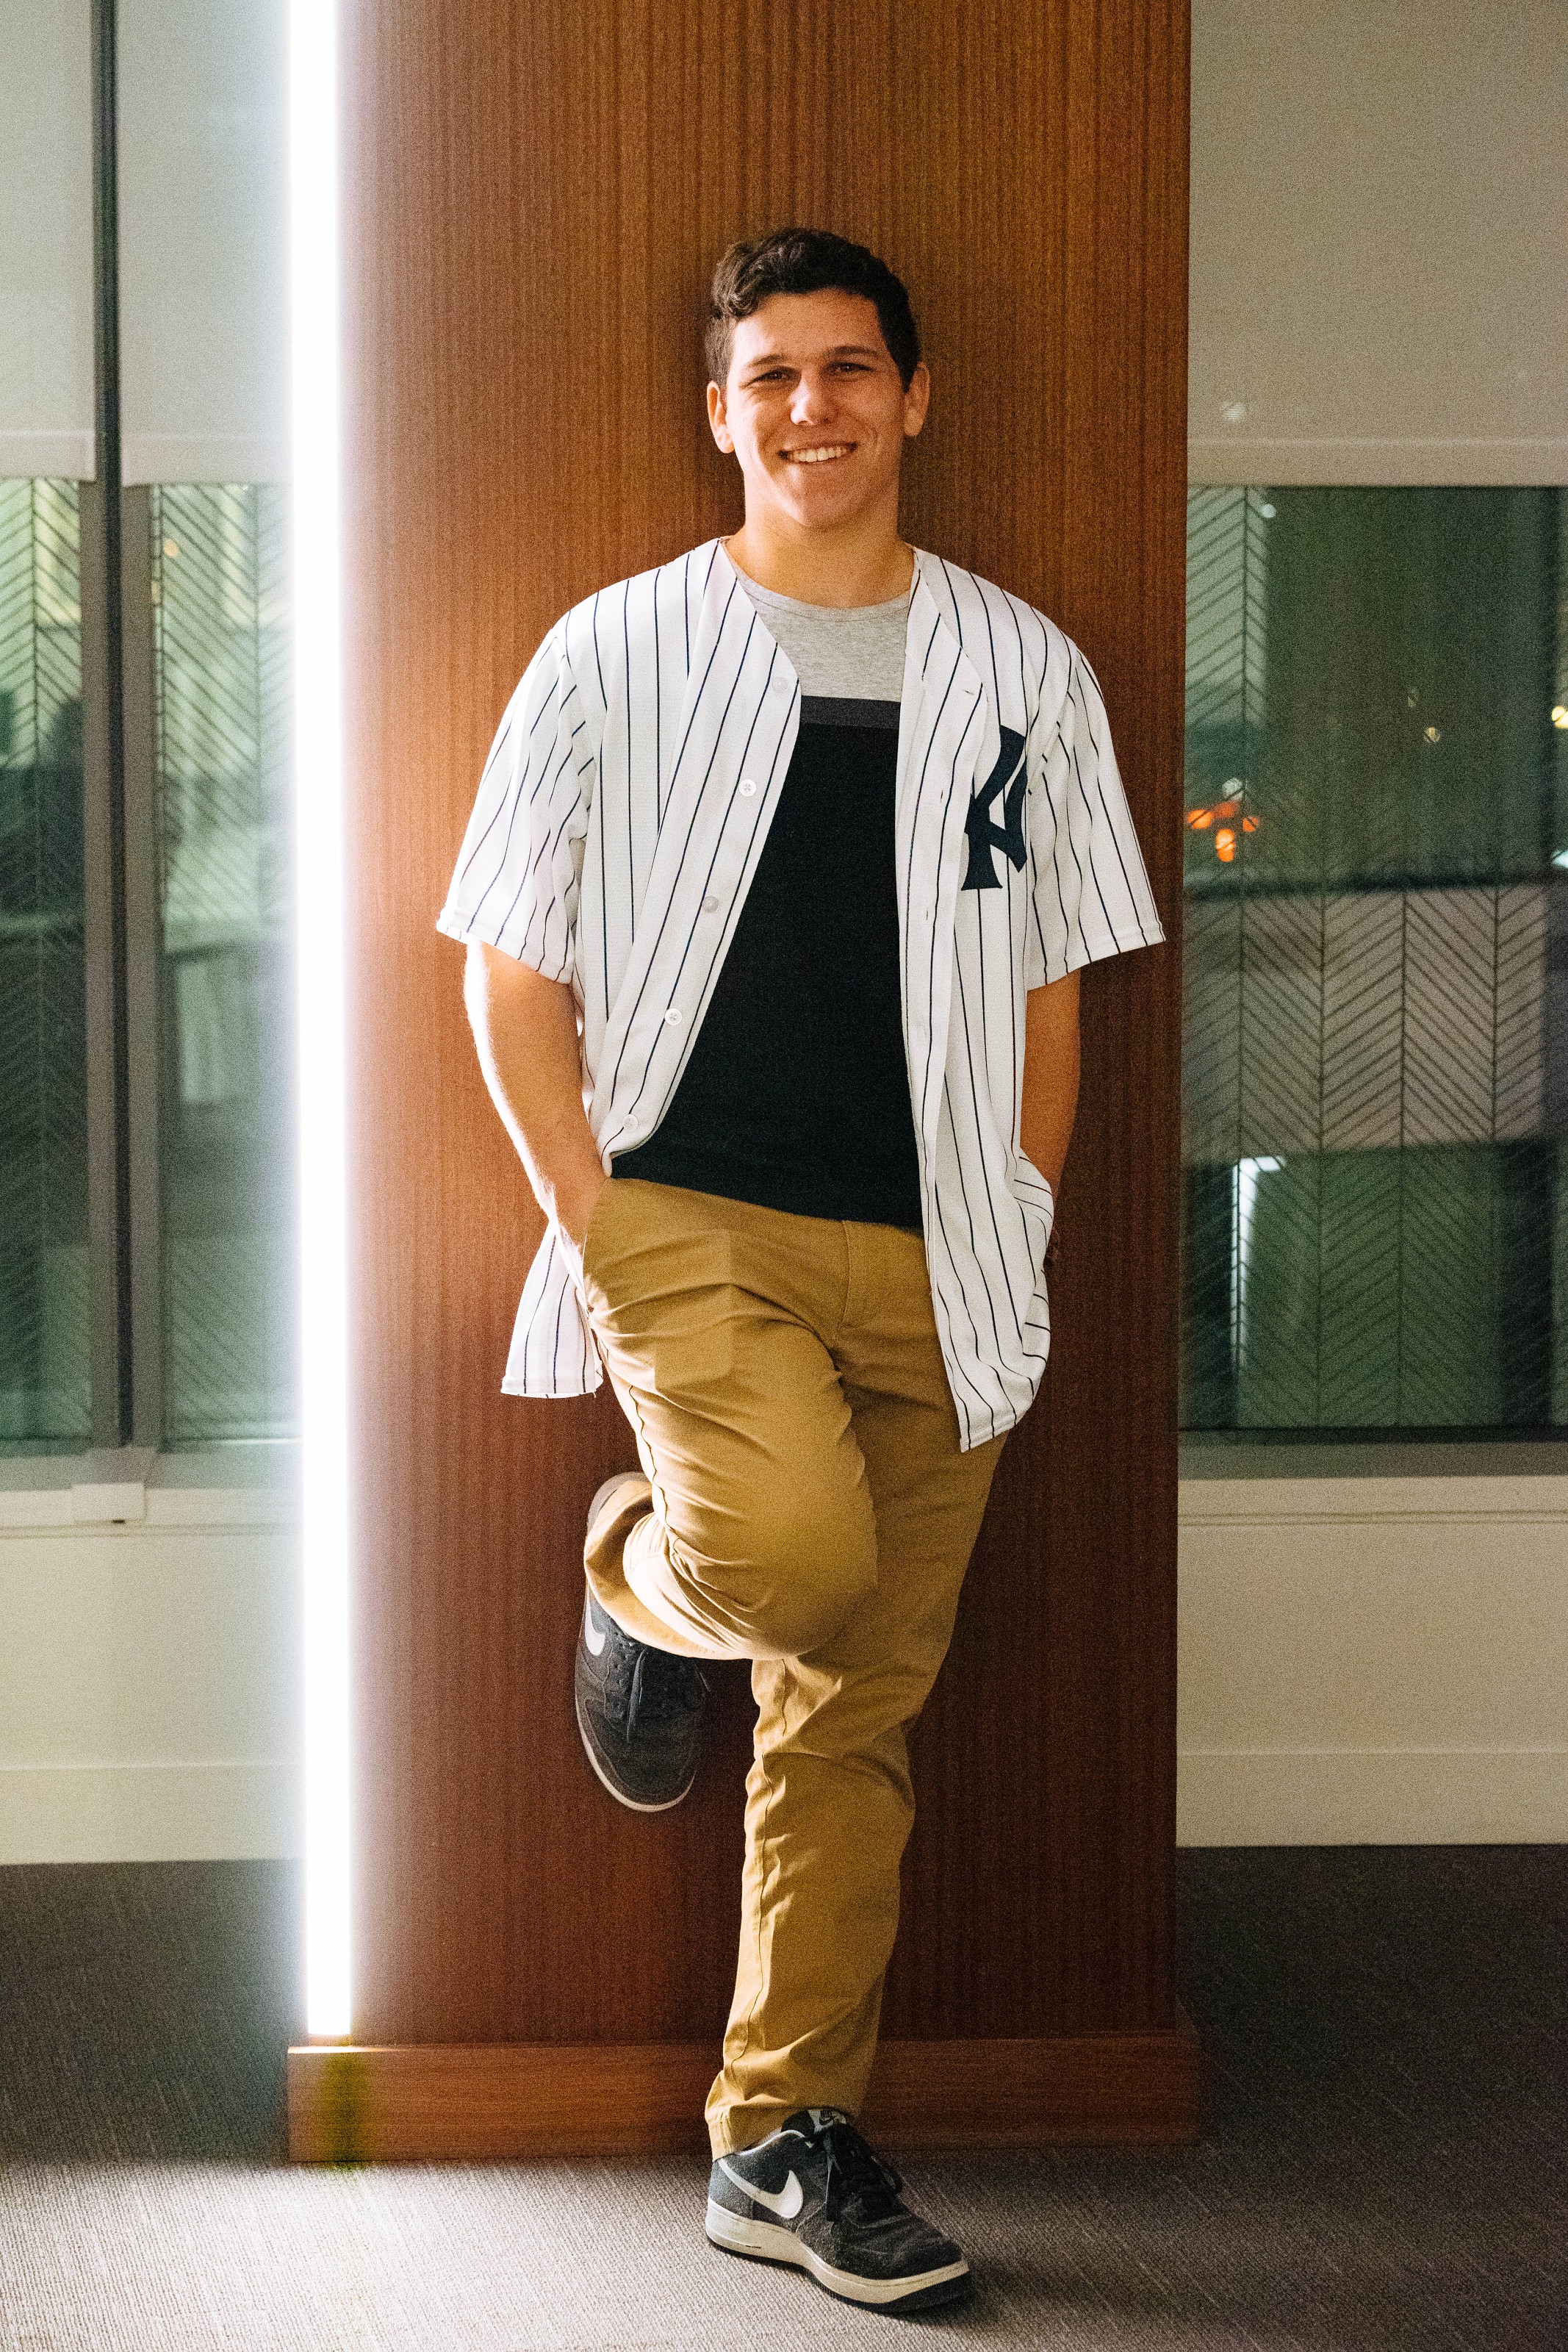 yankee jersey outfit